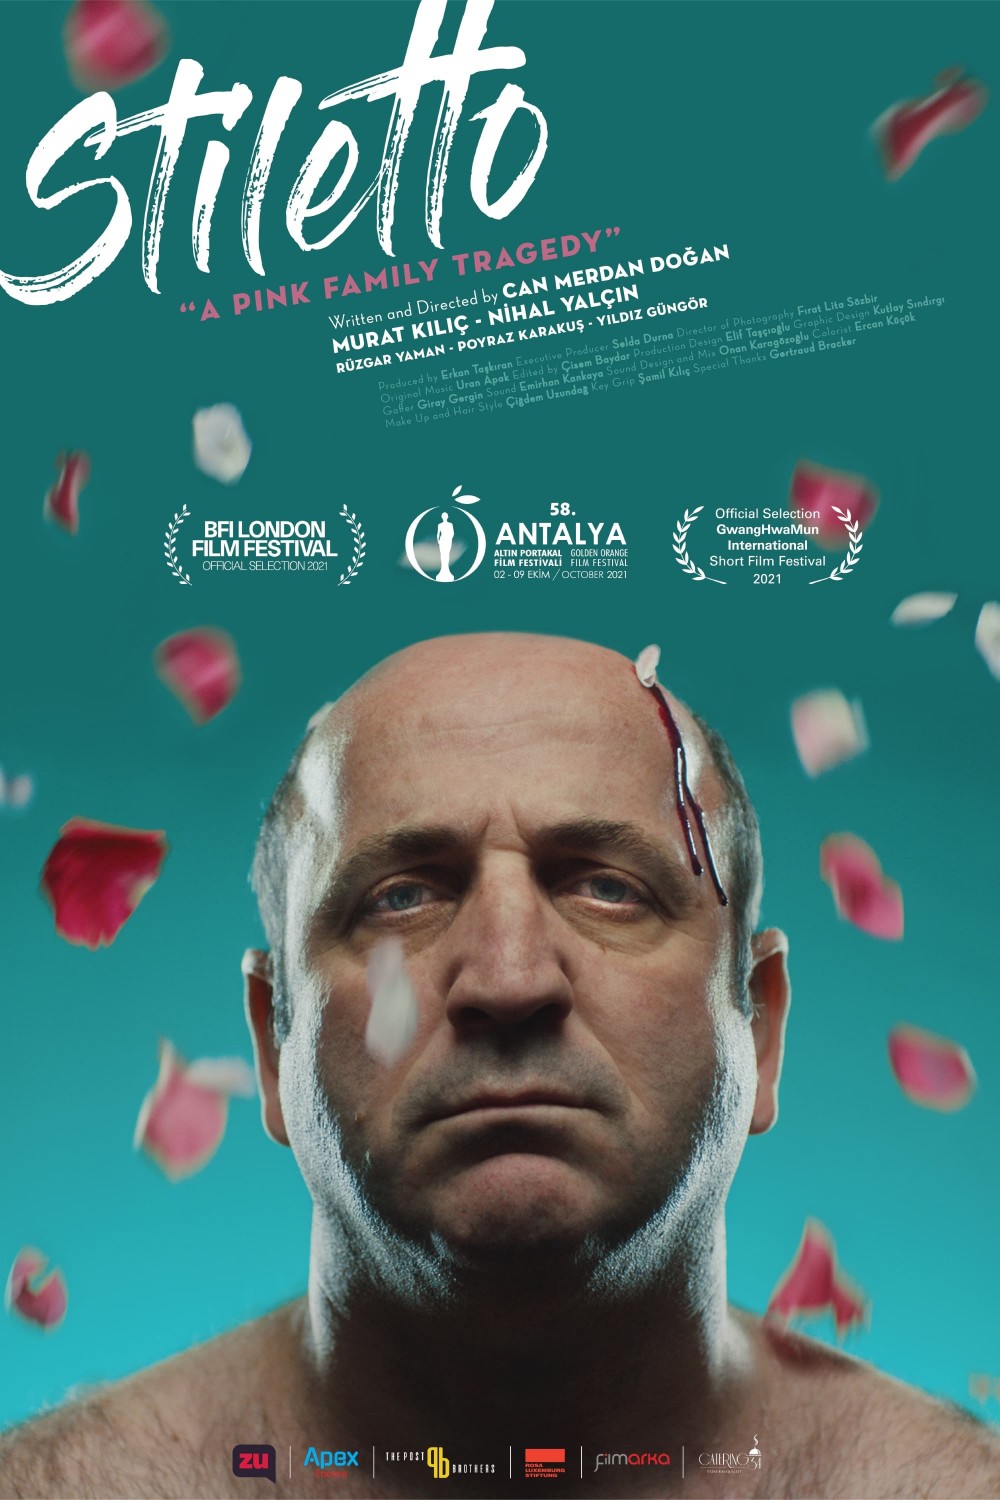 Extra Large Movie Poster Image for Stiletto 'A Pink Family Tragedy'